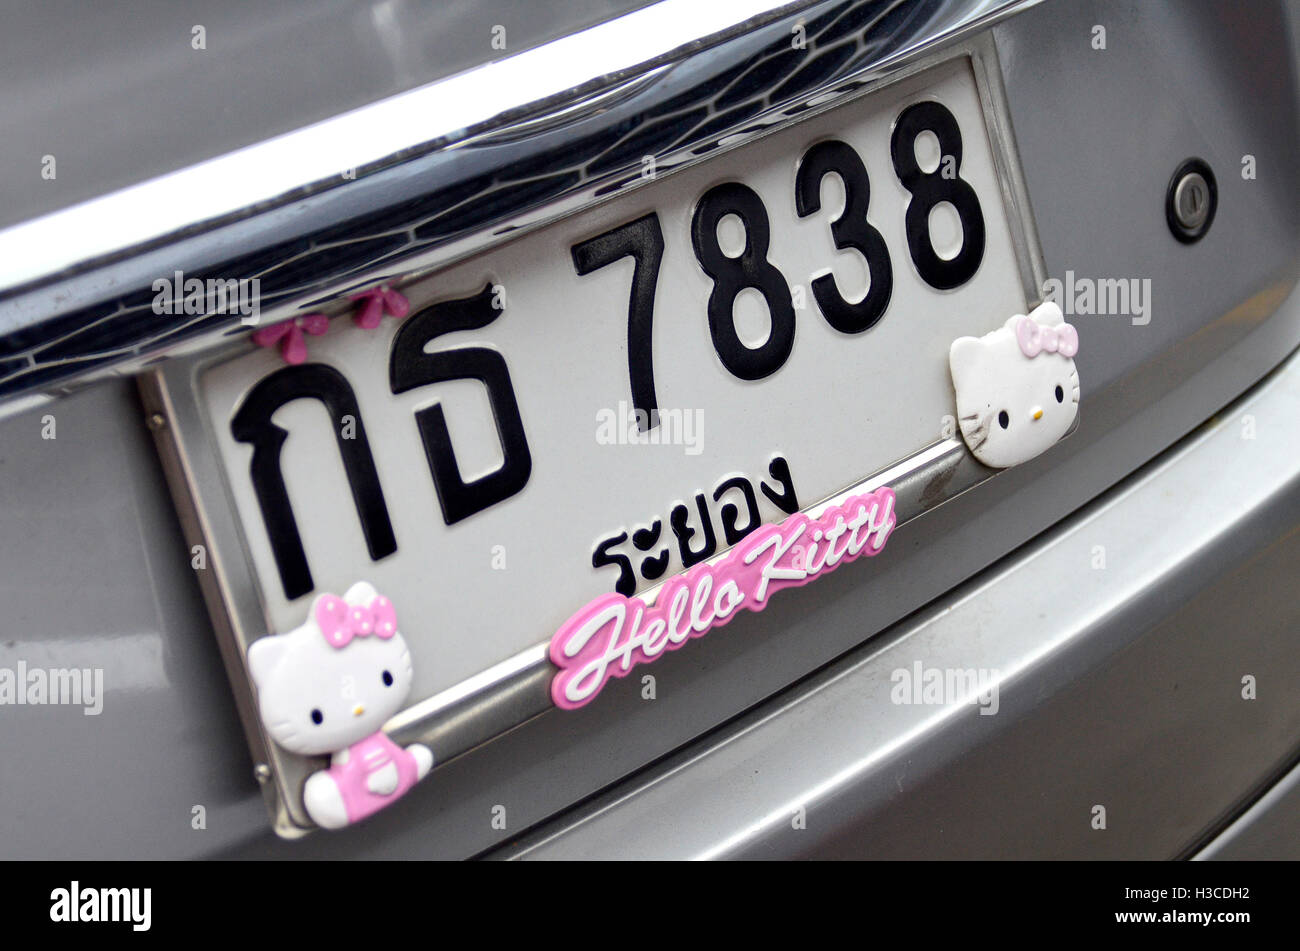 hello kitty number plate in bangkok, thailand Stock Photo